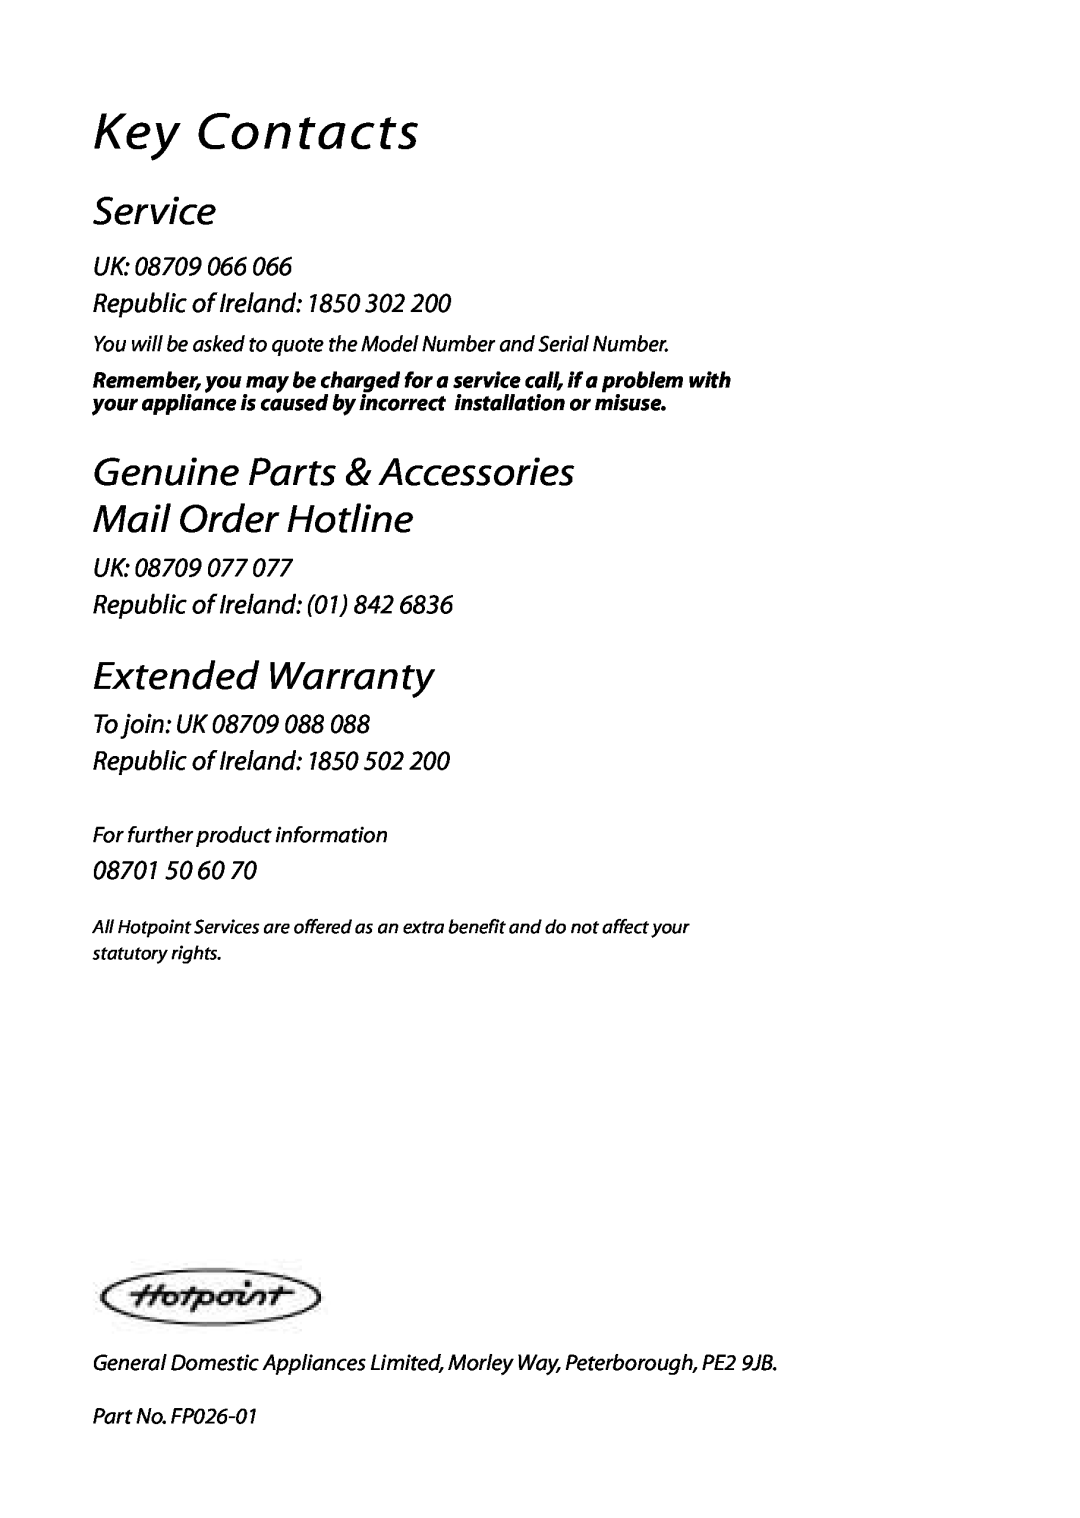 Hotpoint DWF61 Service, Genuine Parts & Accessories Mail Order Hotline, Extended Warranty, For further product information 